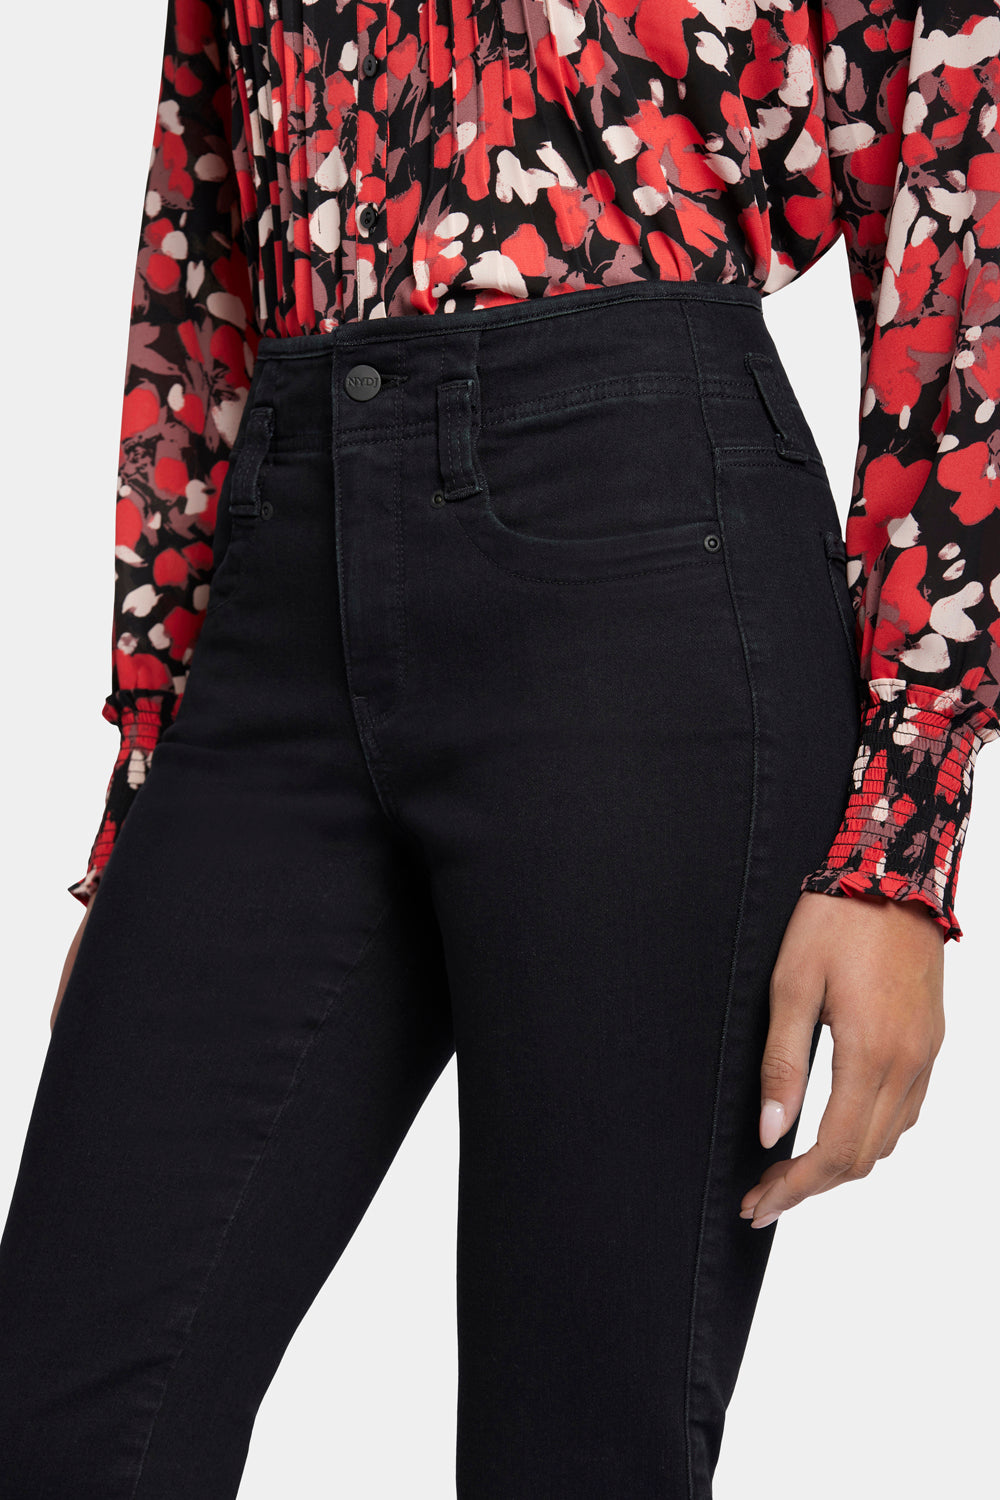 NYDJ Marilyn Straight Jeans  With High Rise And Frayed Hems - Huntley